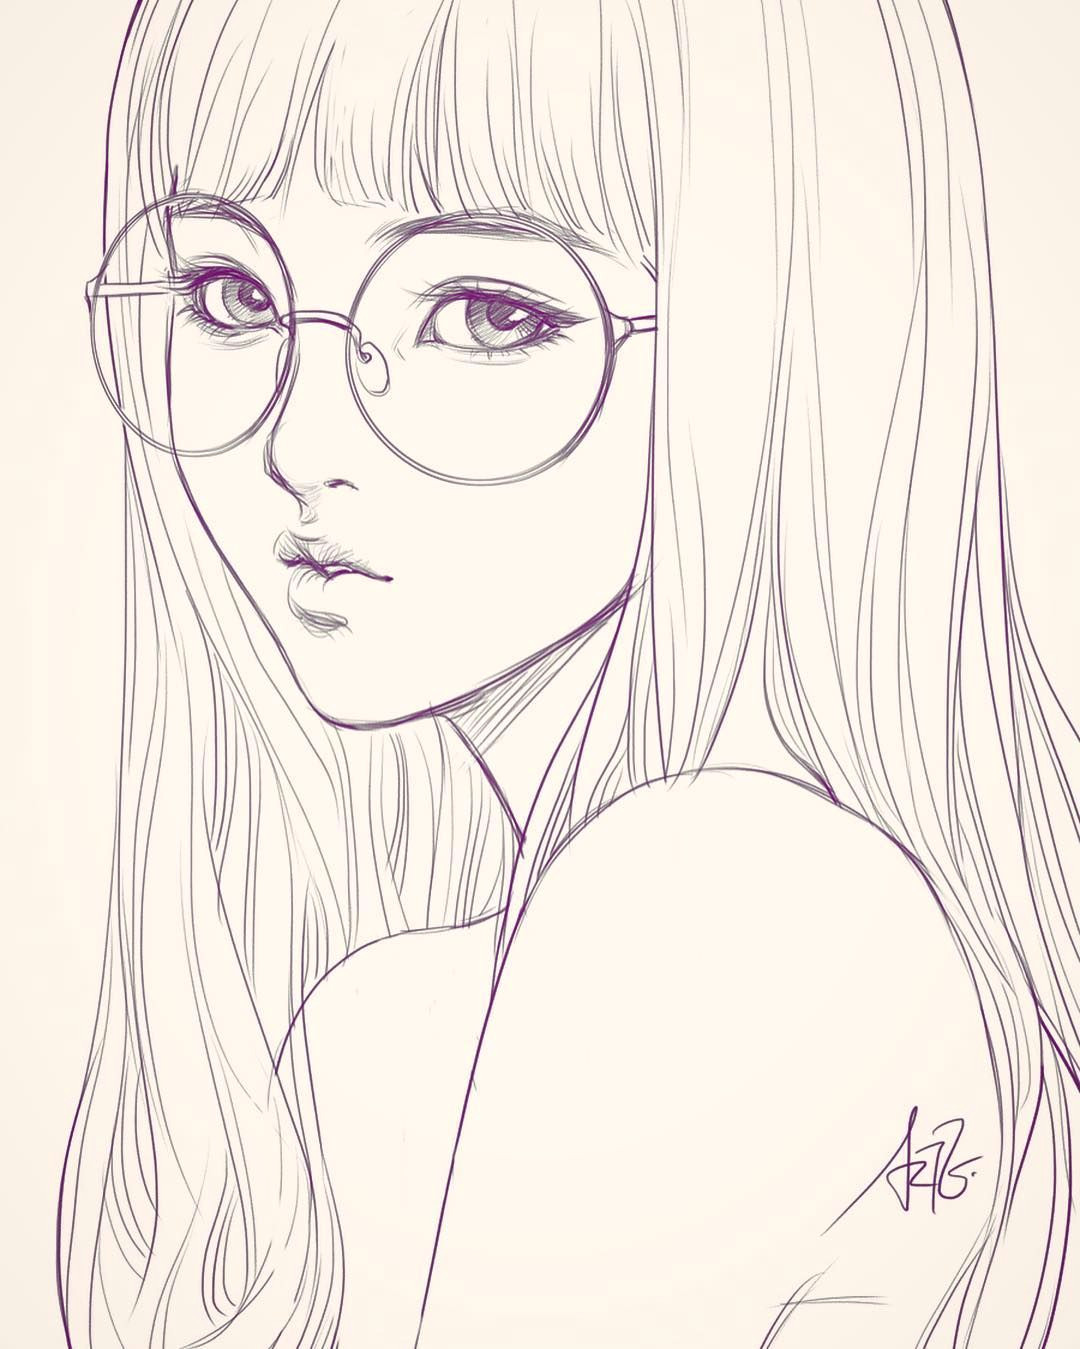 Drawing Manga Girl Face Last Sketch Of Girl with Glasses Having Bad Backache It Hurts